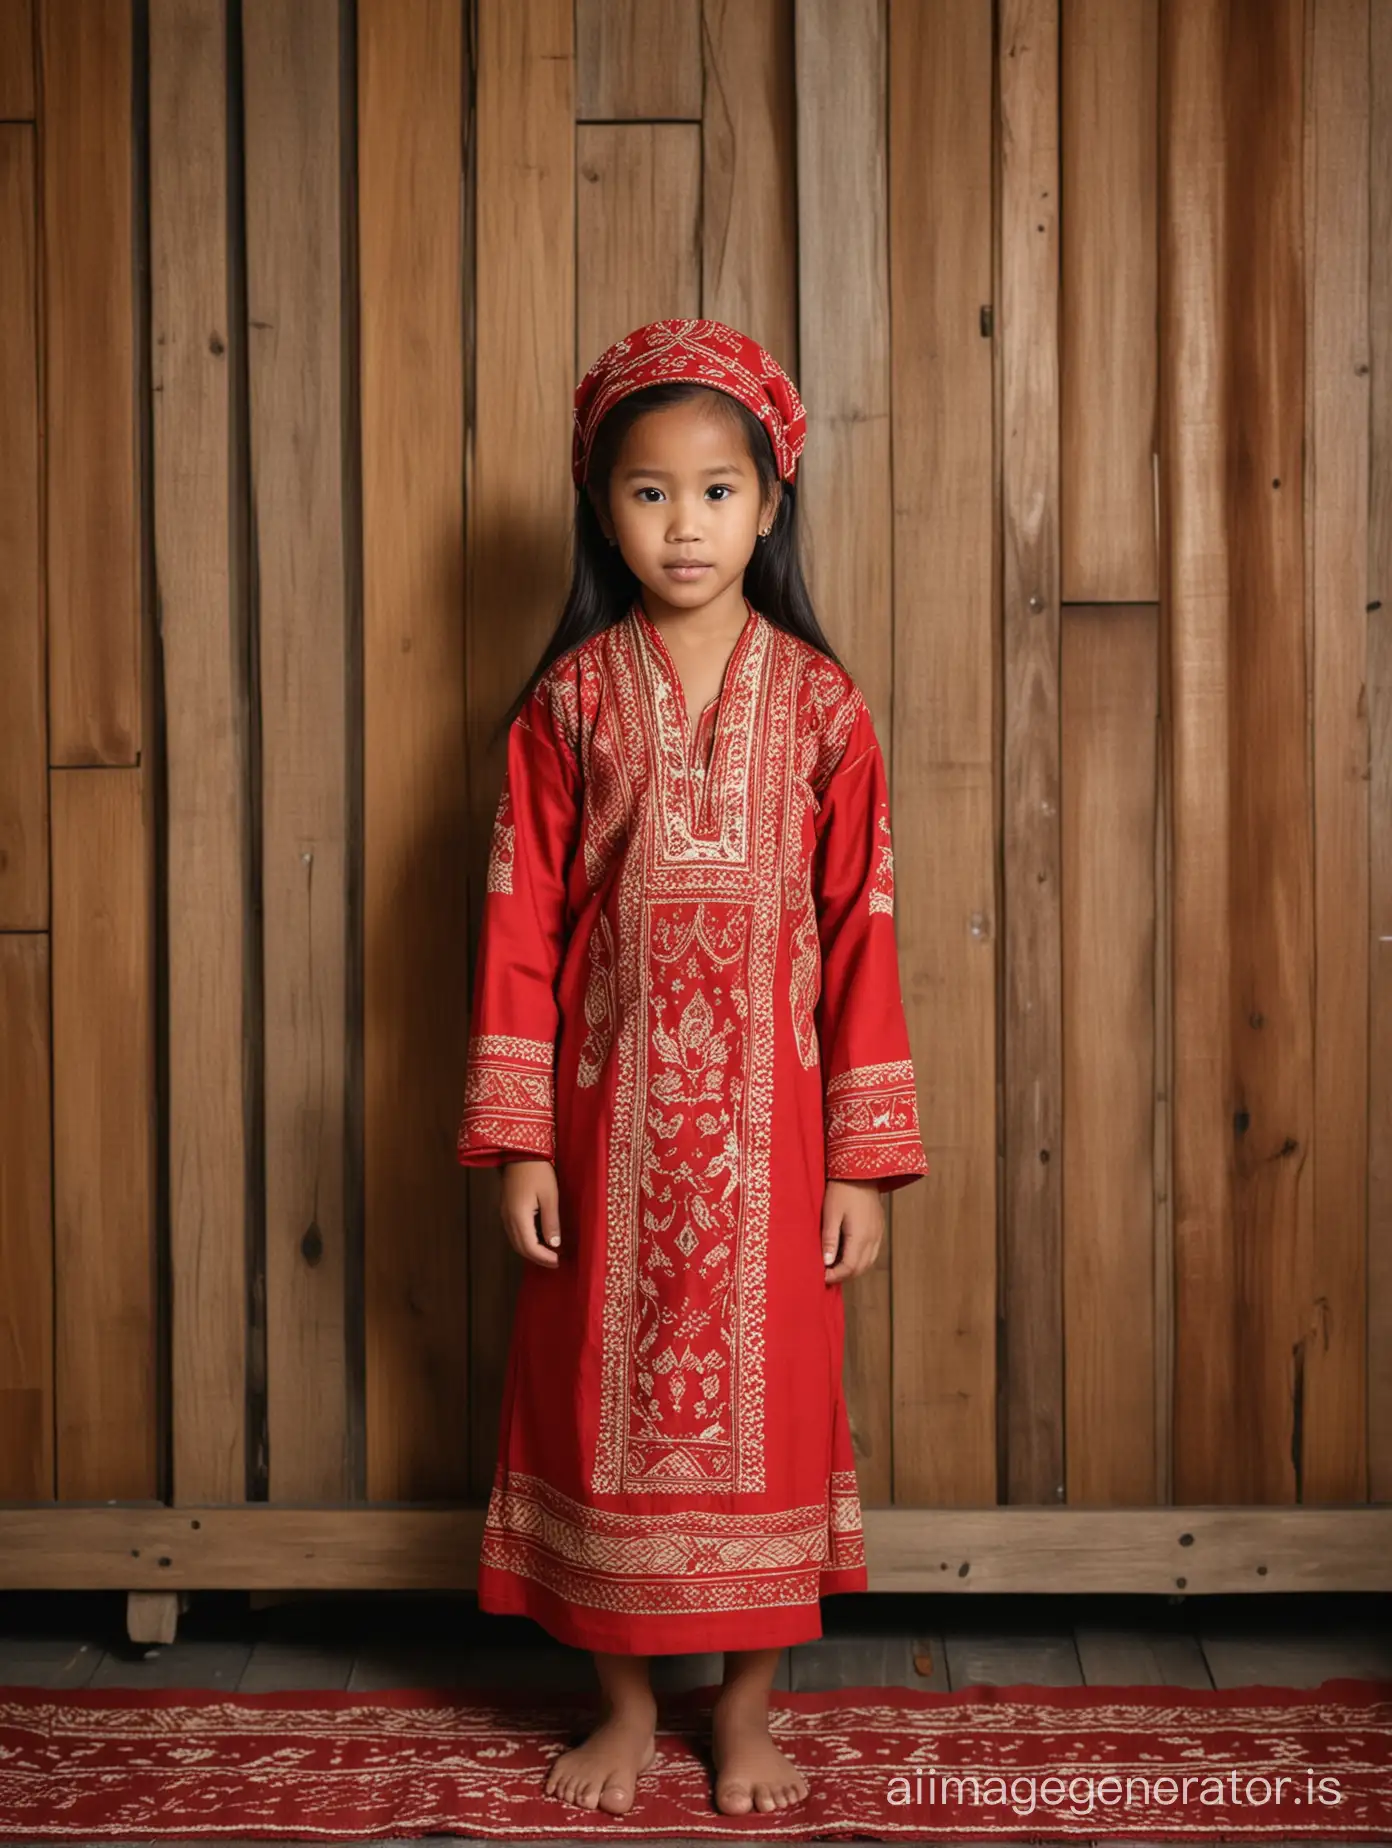 an Indonesian girl aged 6 years wearing traditional Tana Toraja clothes inside the house with a wooden background